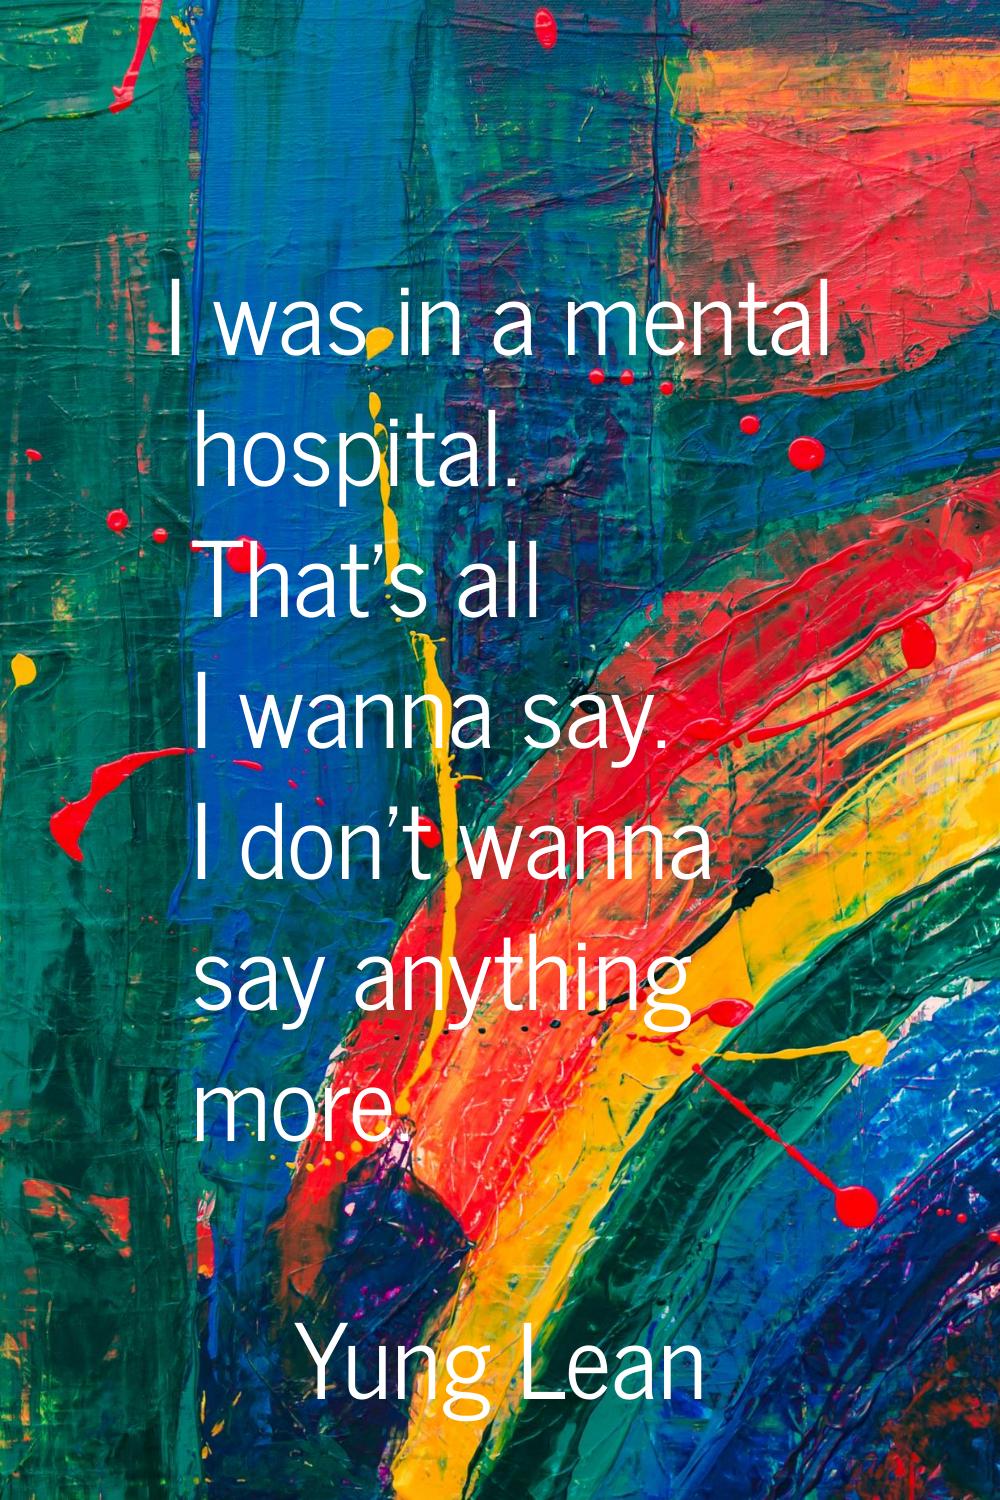 I was in a mental hospital. That's all I wanna say. I don't wanna say anything more.